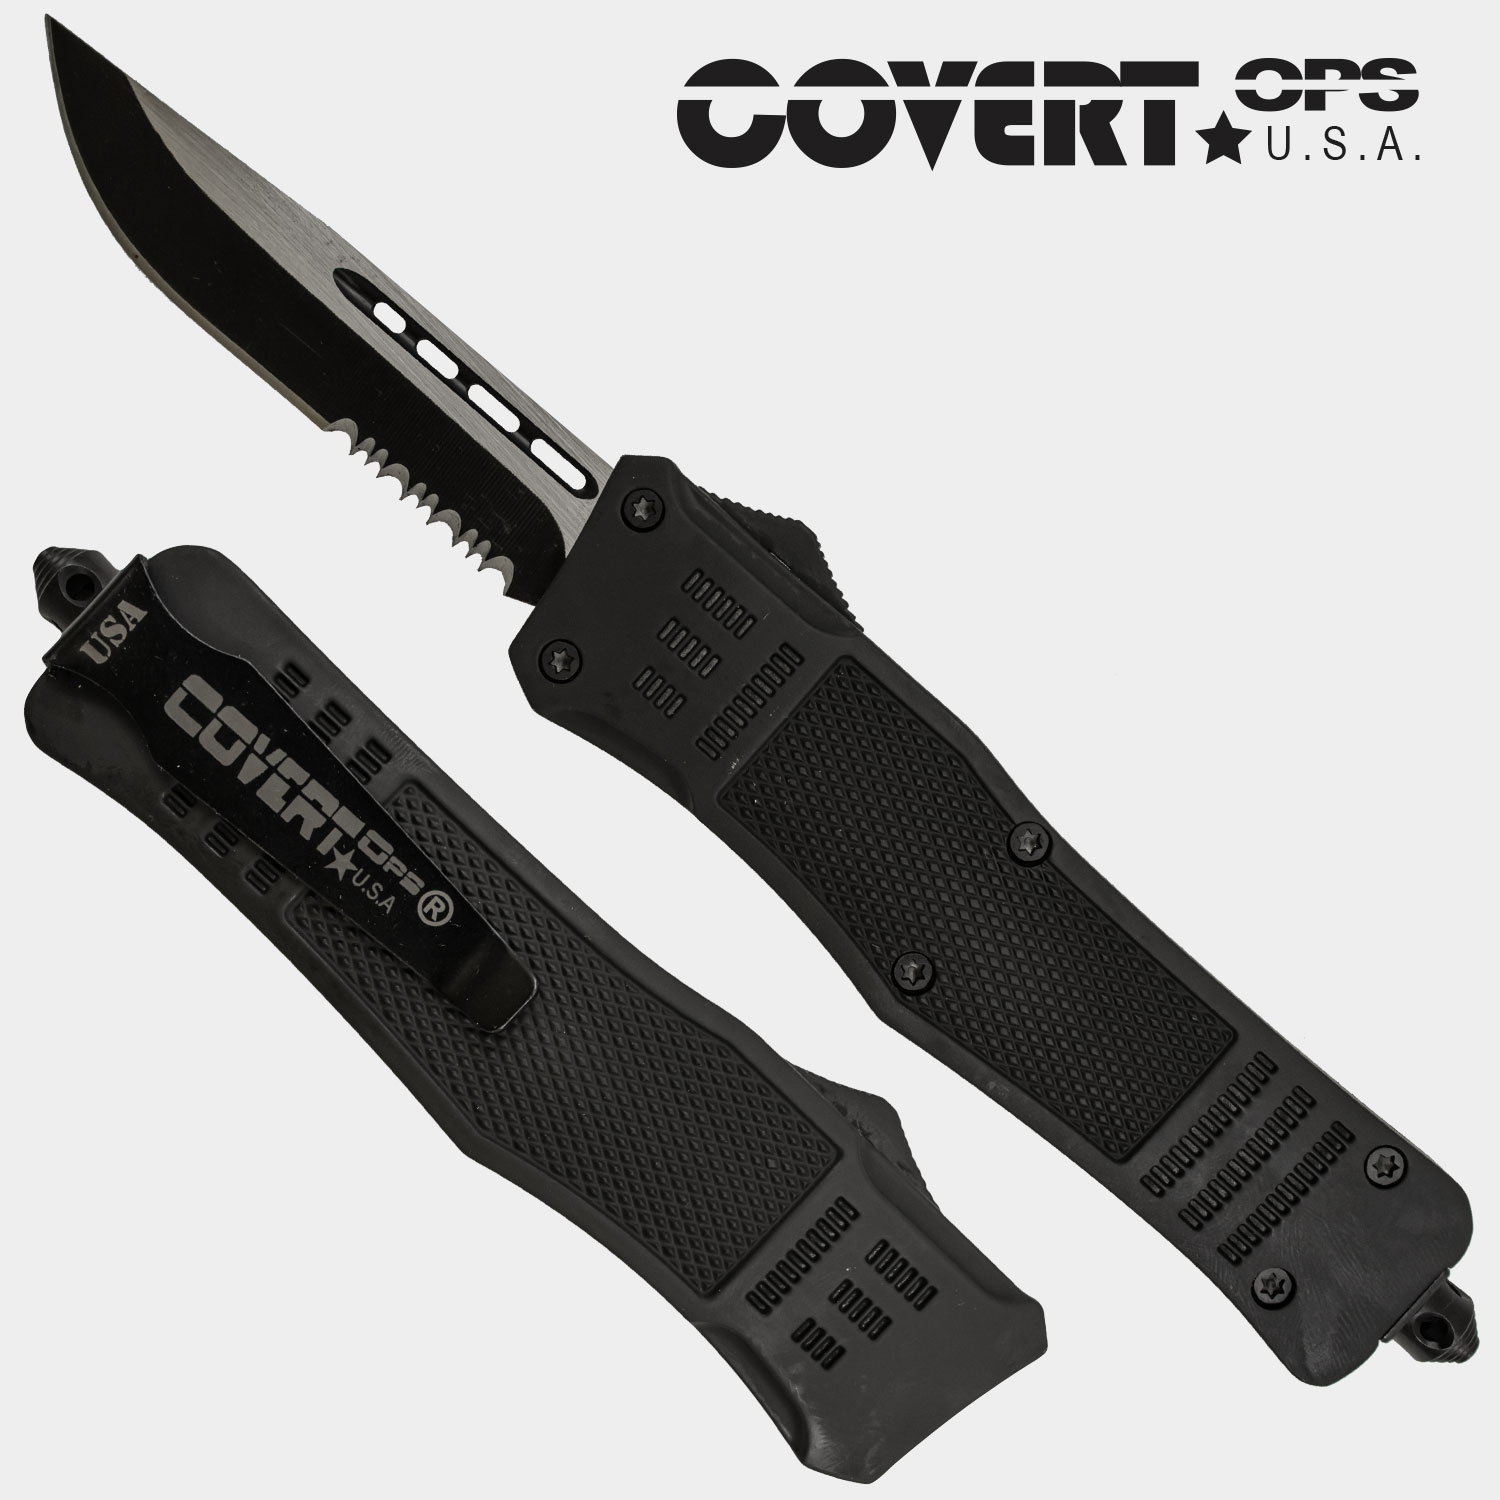 Covert OPS USA OTF Automatic Knife 9 inch Overall Black Handle Two Tone Plain Serrated D2 Steel Blade